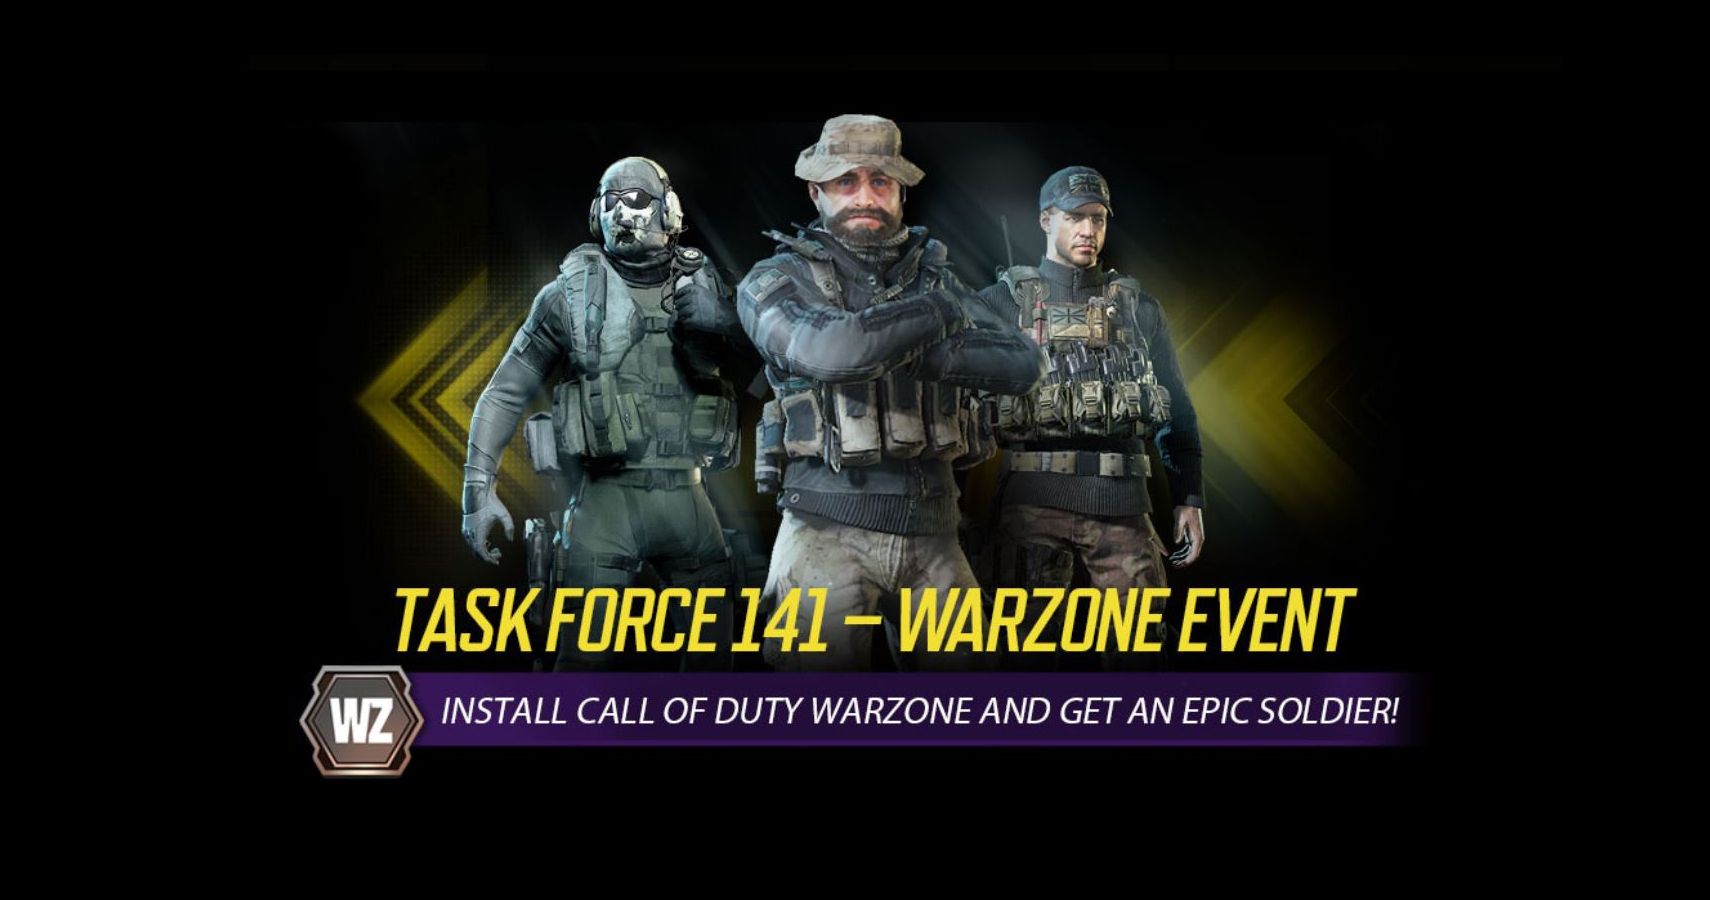 Earn Rewards In Call Of Duty Mobile For Installing Call Of Duty Warzone